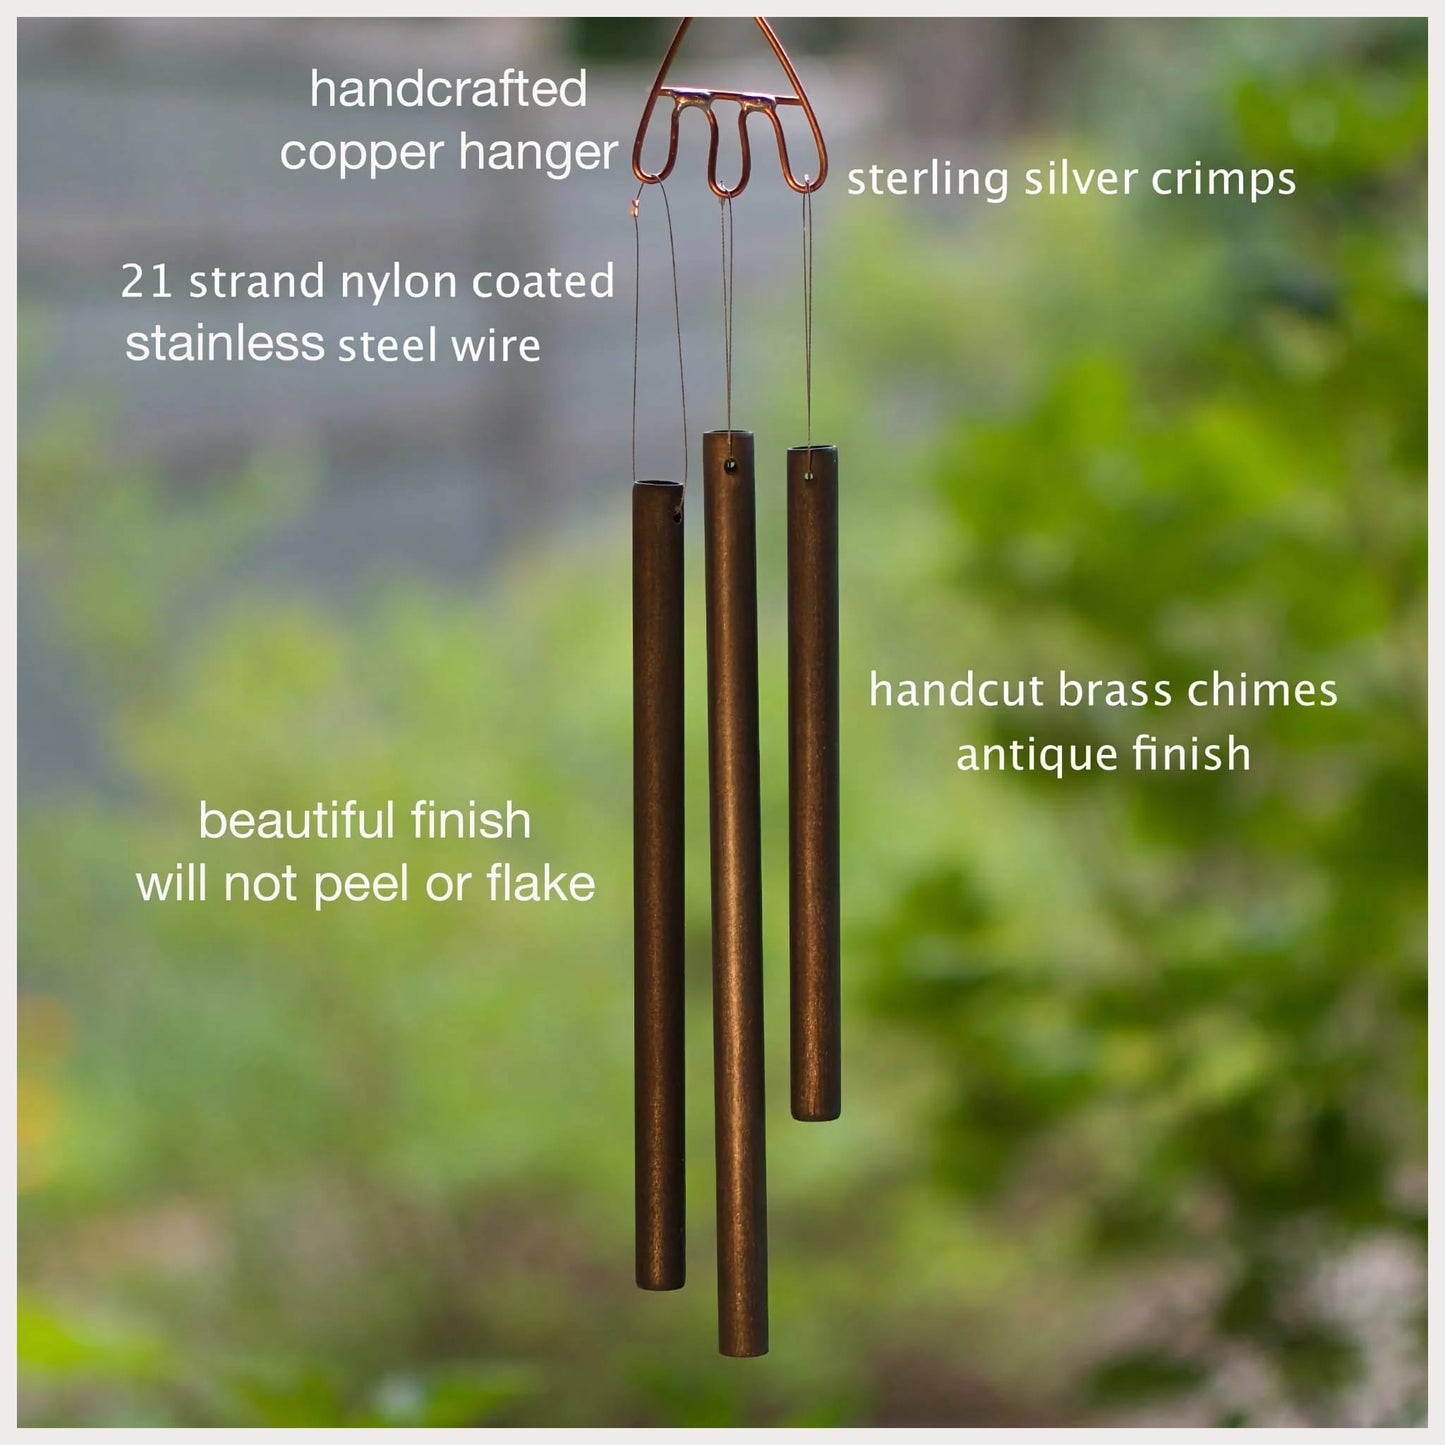 handmade brass chimes with parts labeled 